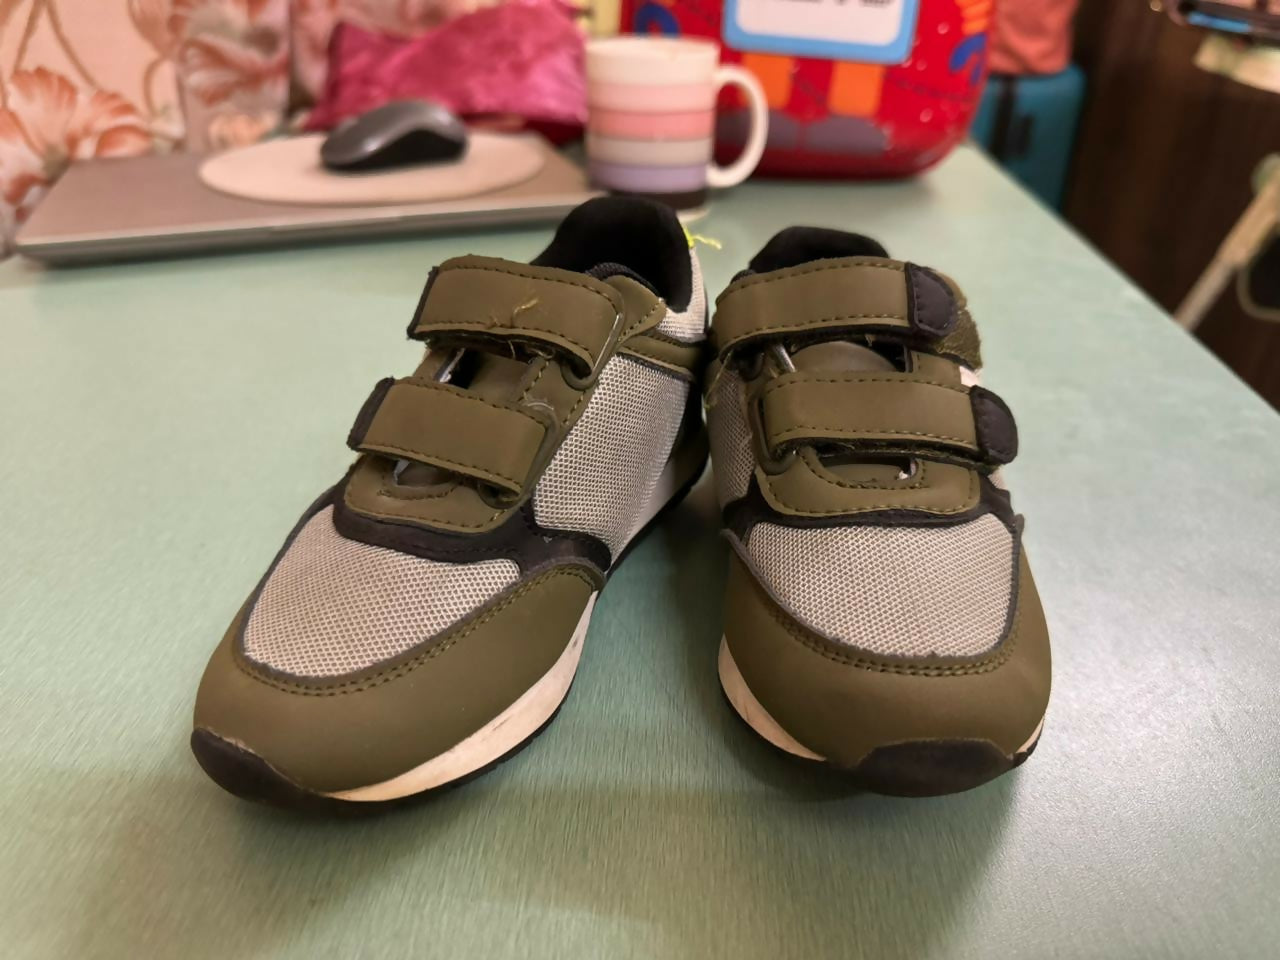 Step into style and comfort with SHOEEXPRESS Shoes for Baby, offering gentle support and adorable designs for your little one's first steps.